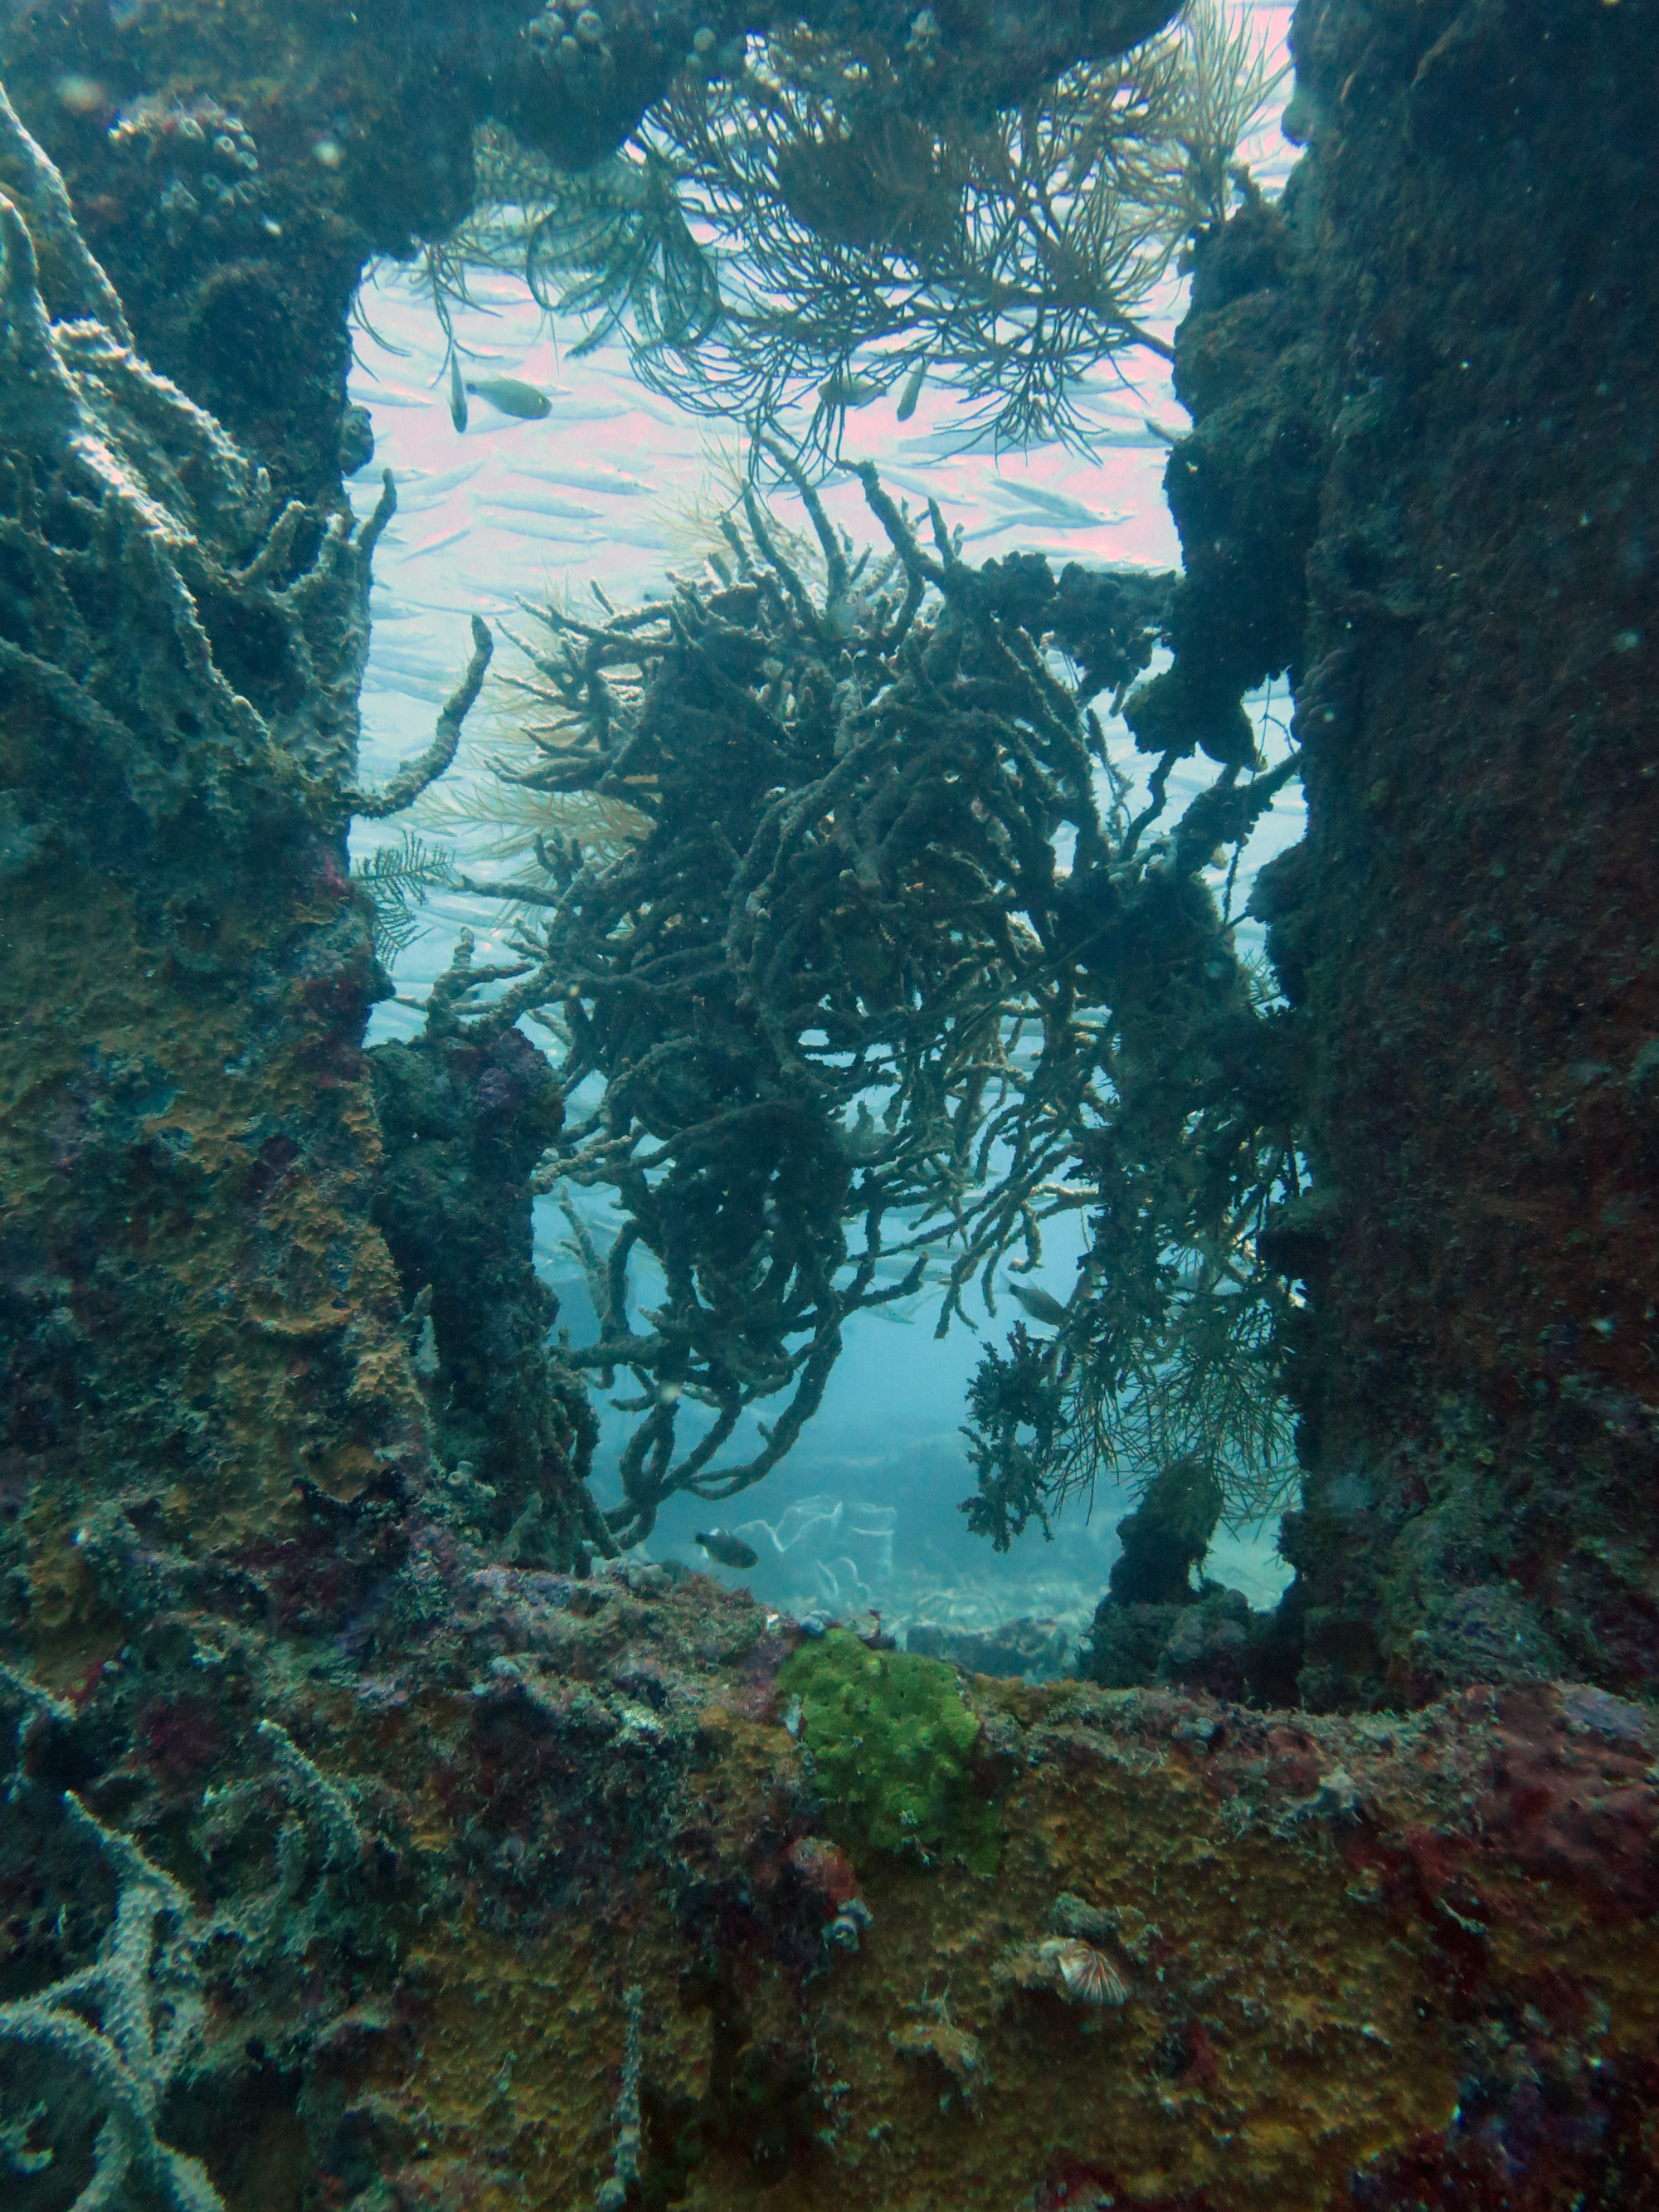 Coral Growth on Superstructure